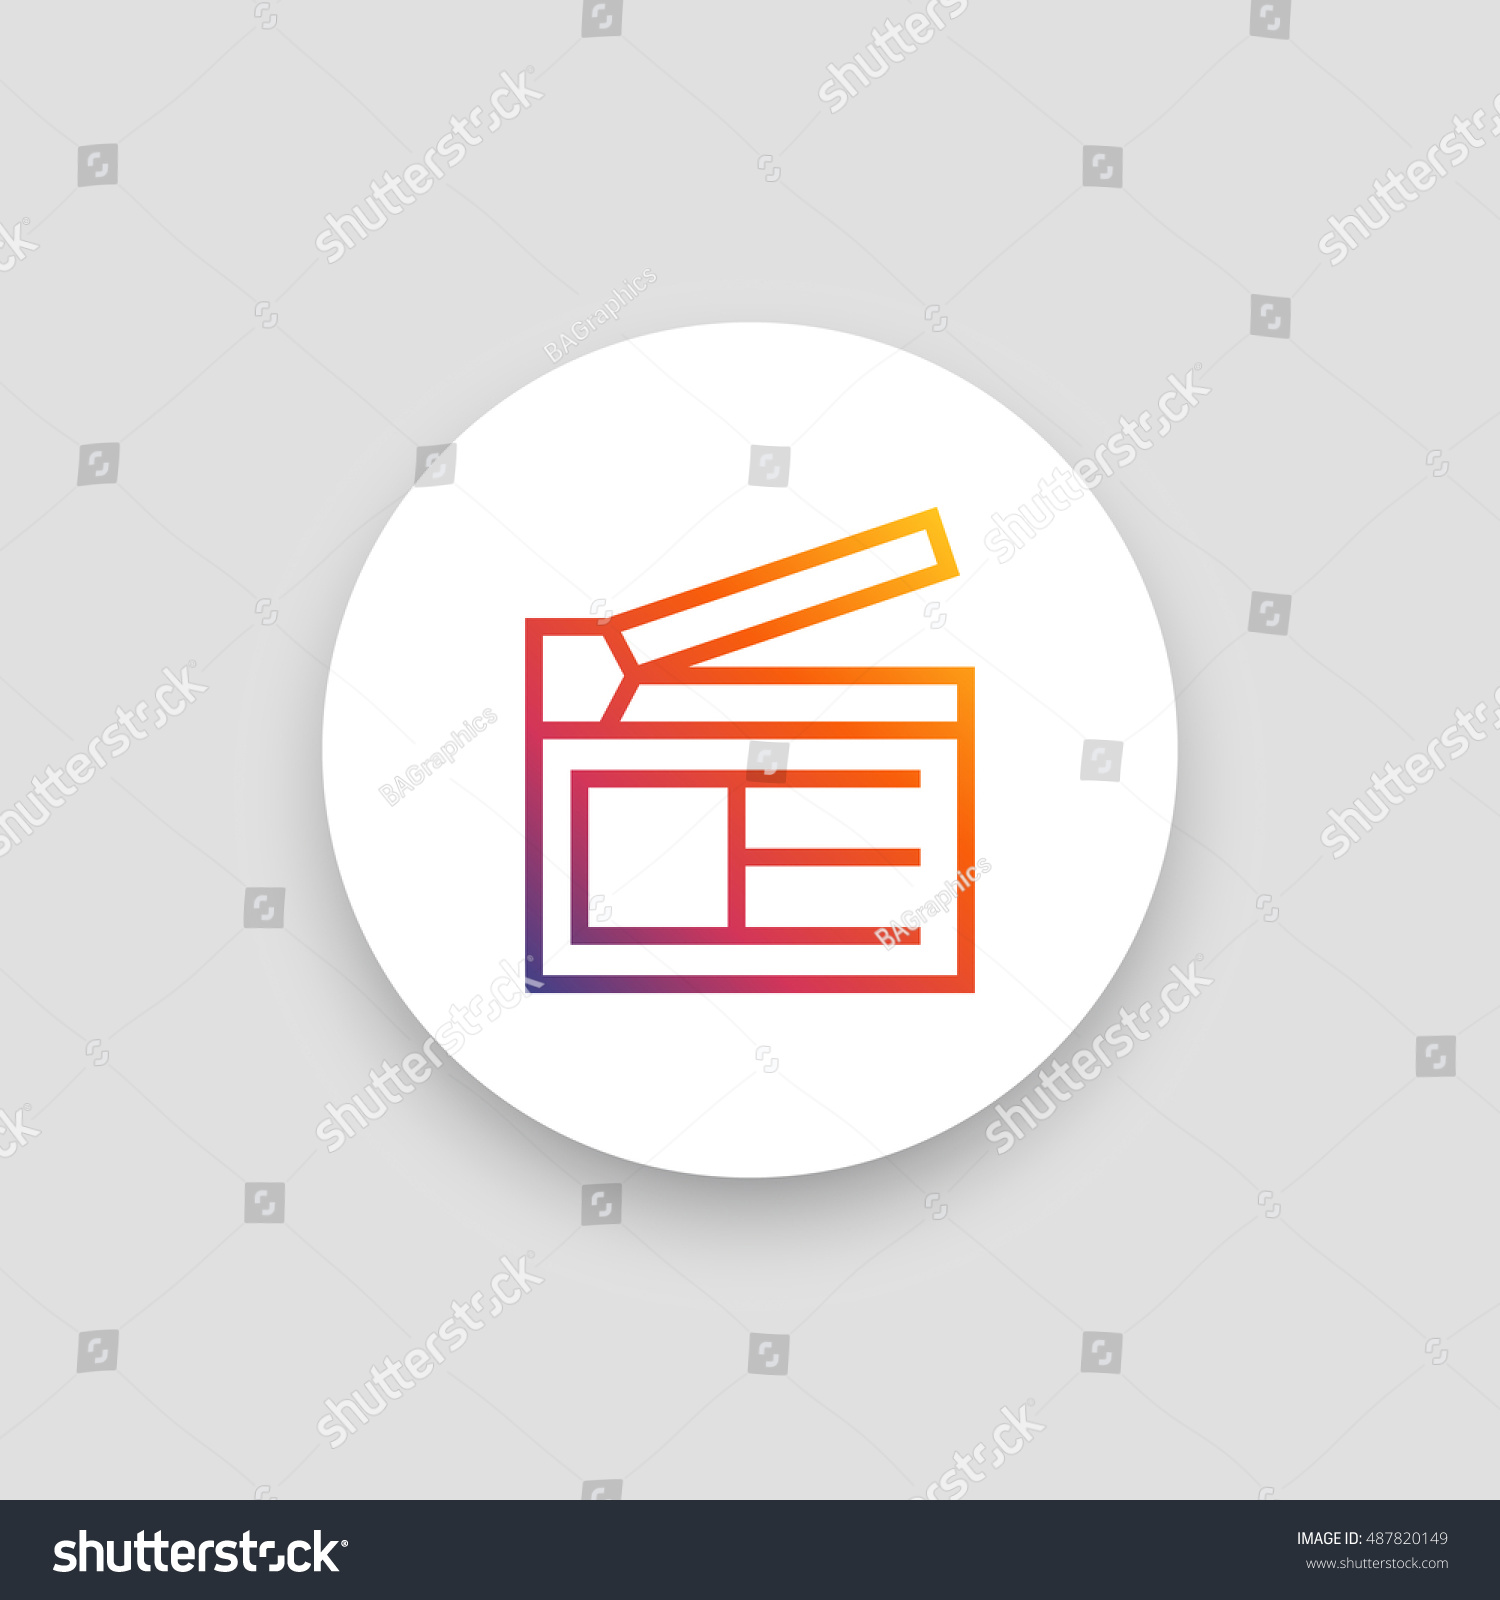 SVG of Clapperboard icon vector, clip art. Also useful as logo, circle app icon, web UI element, symbol, graphic image, silhouette and illustration. Compatible with ai, cdr, jpg, png, svg, pdf, ico and eps. svg